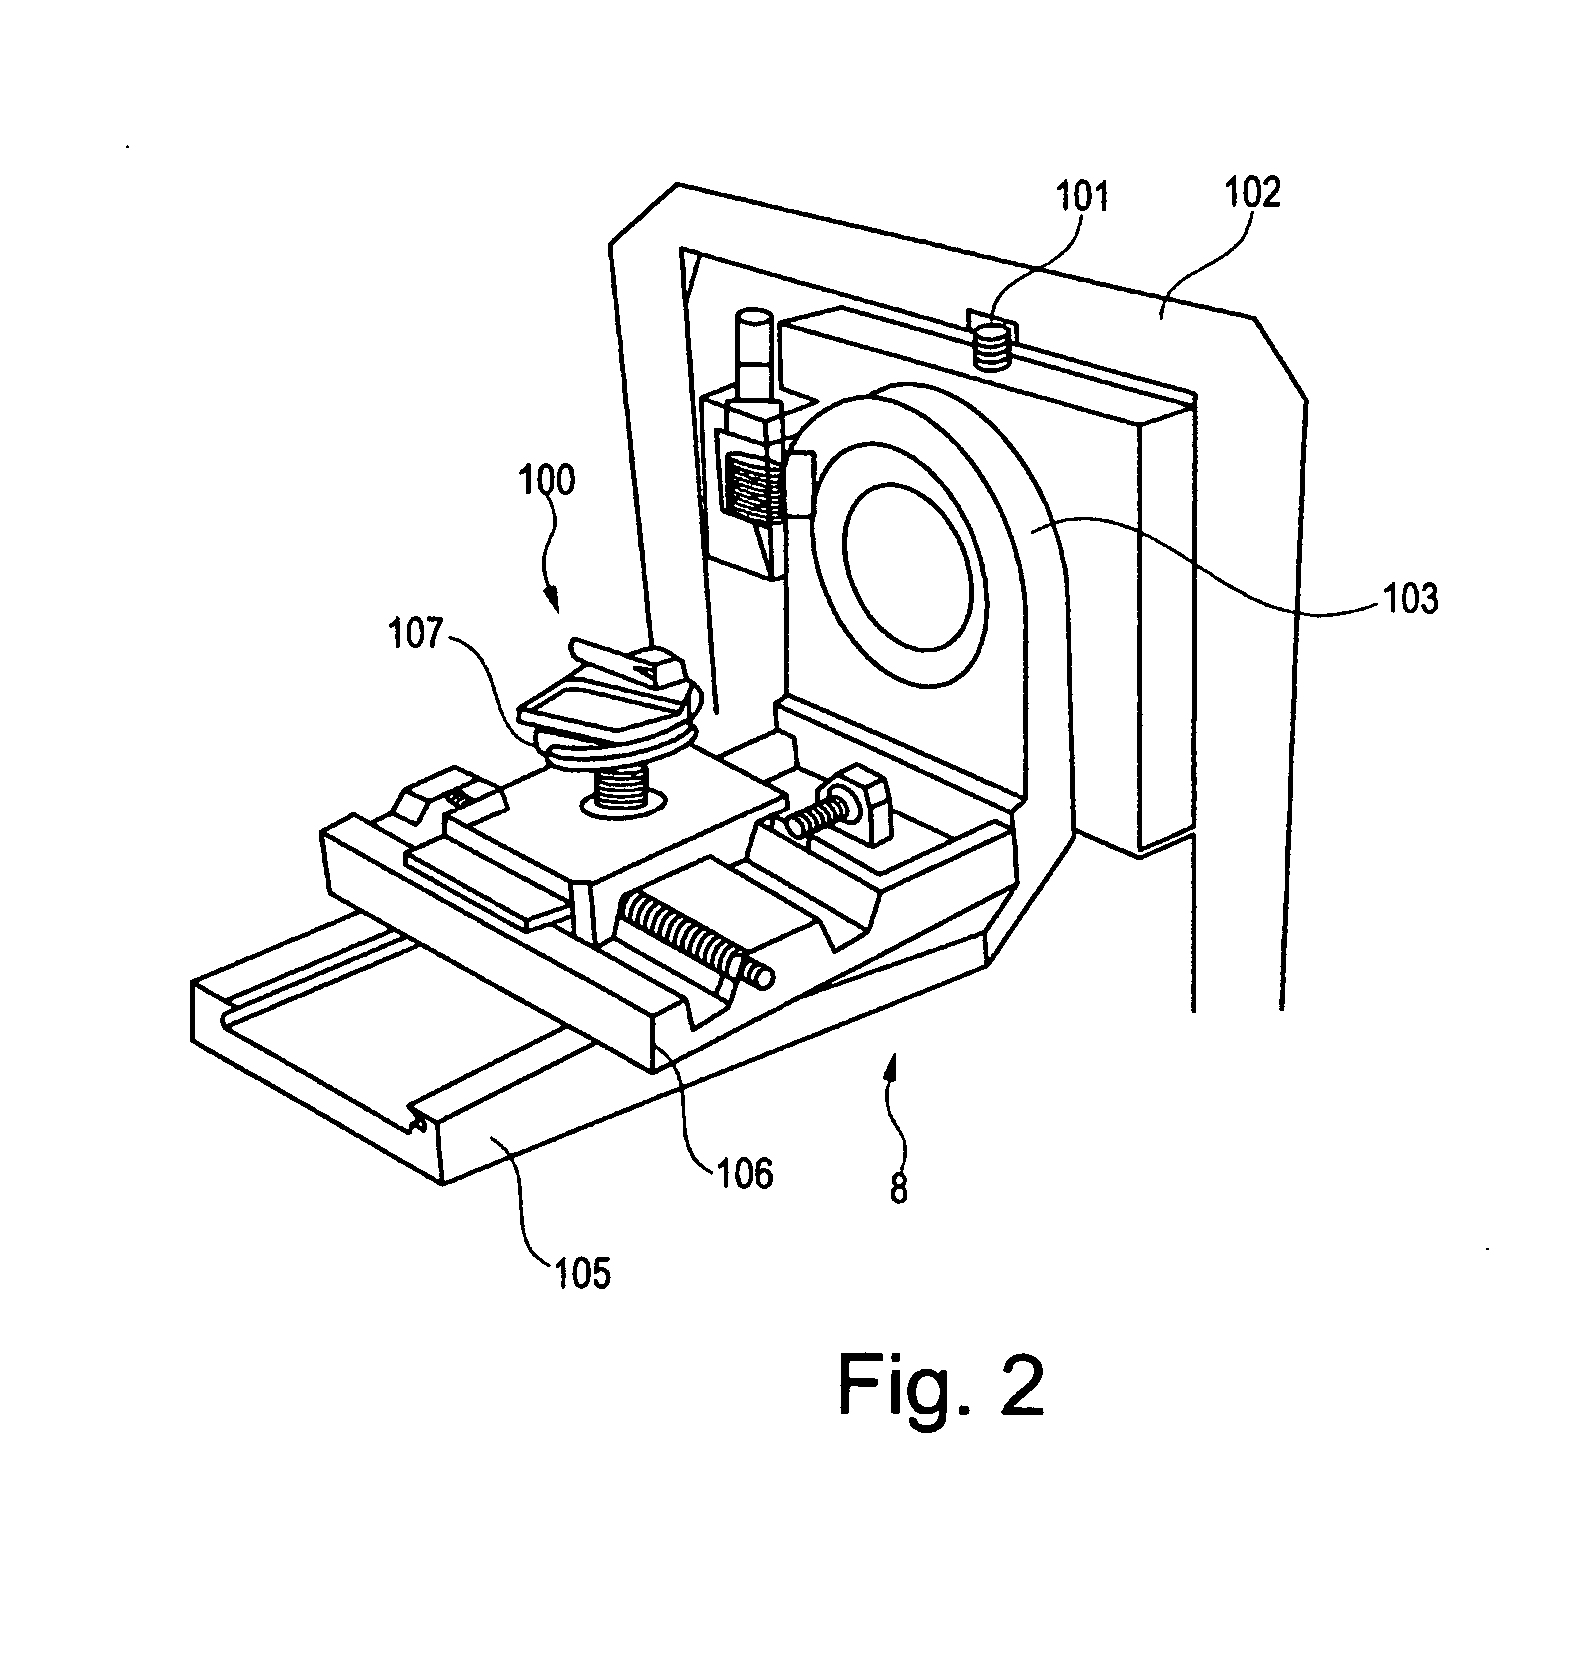 Method for measuring a distance of a component from an object and for setting a position of a component in a particle beam device